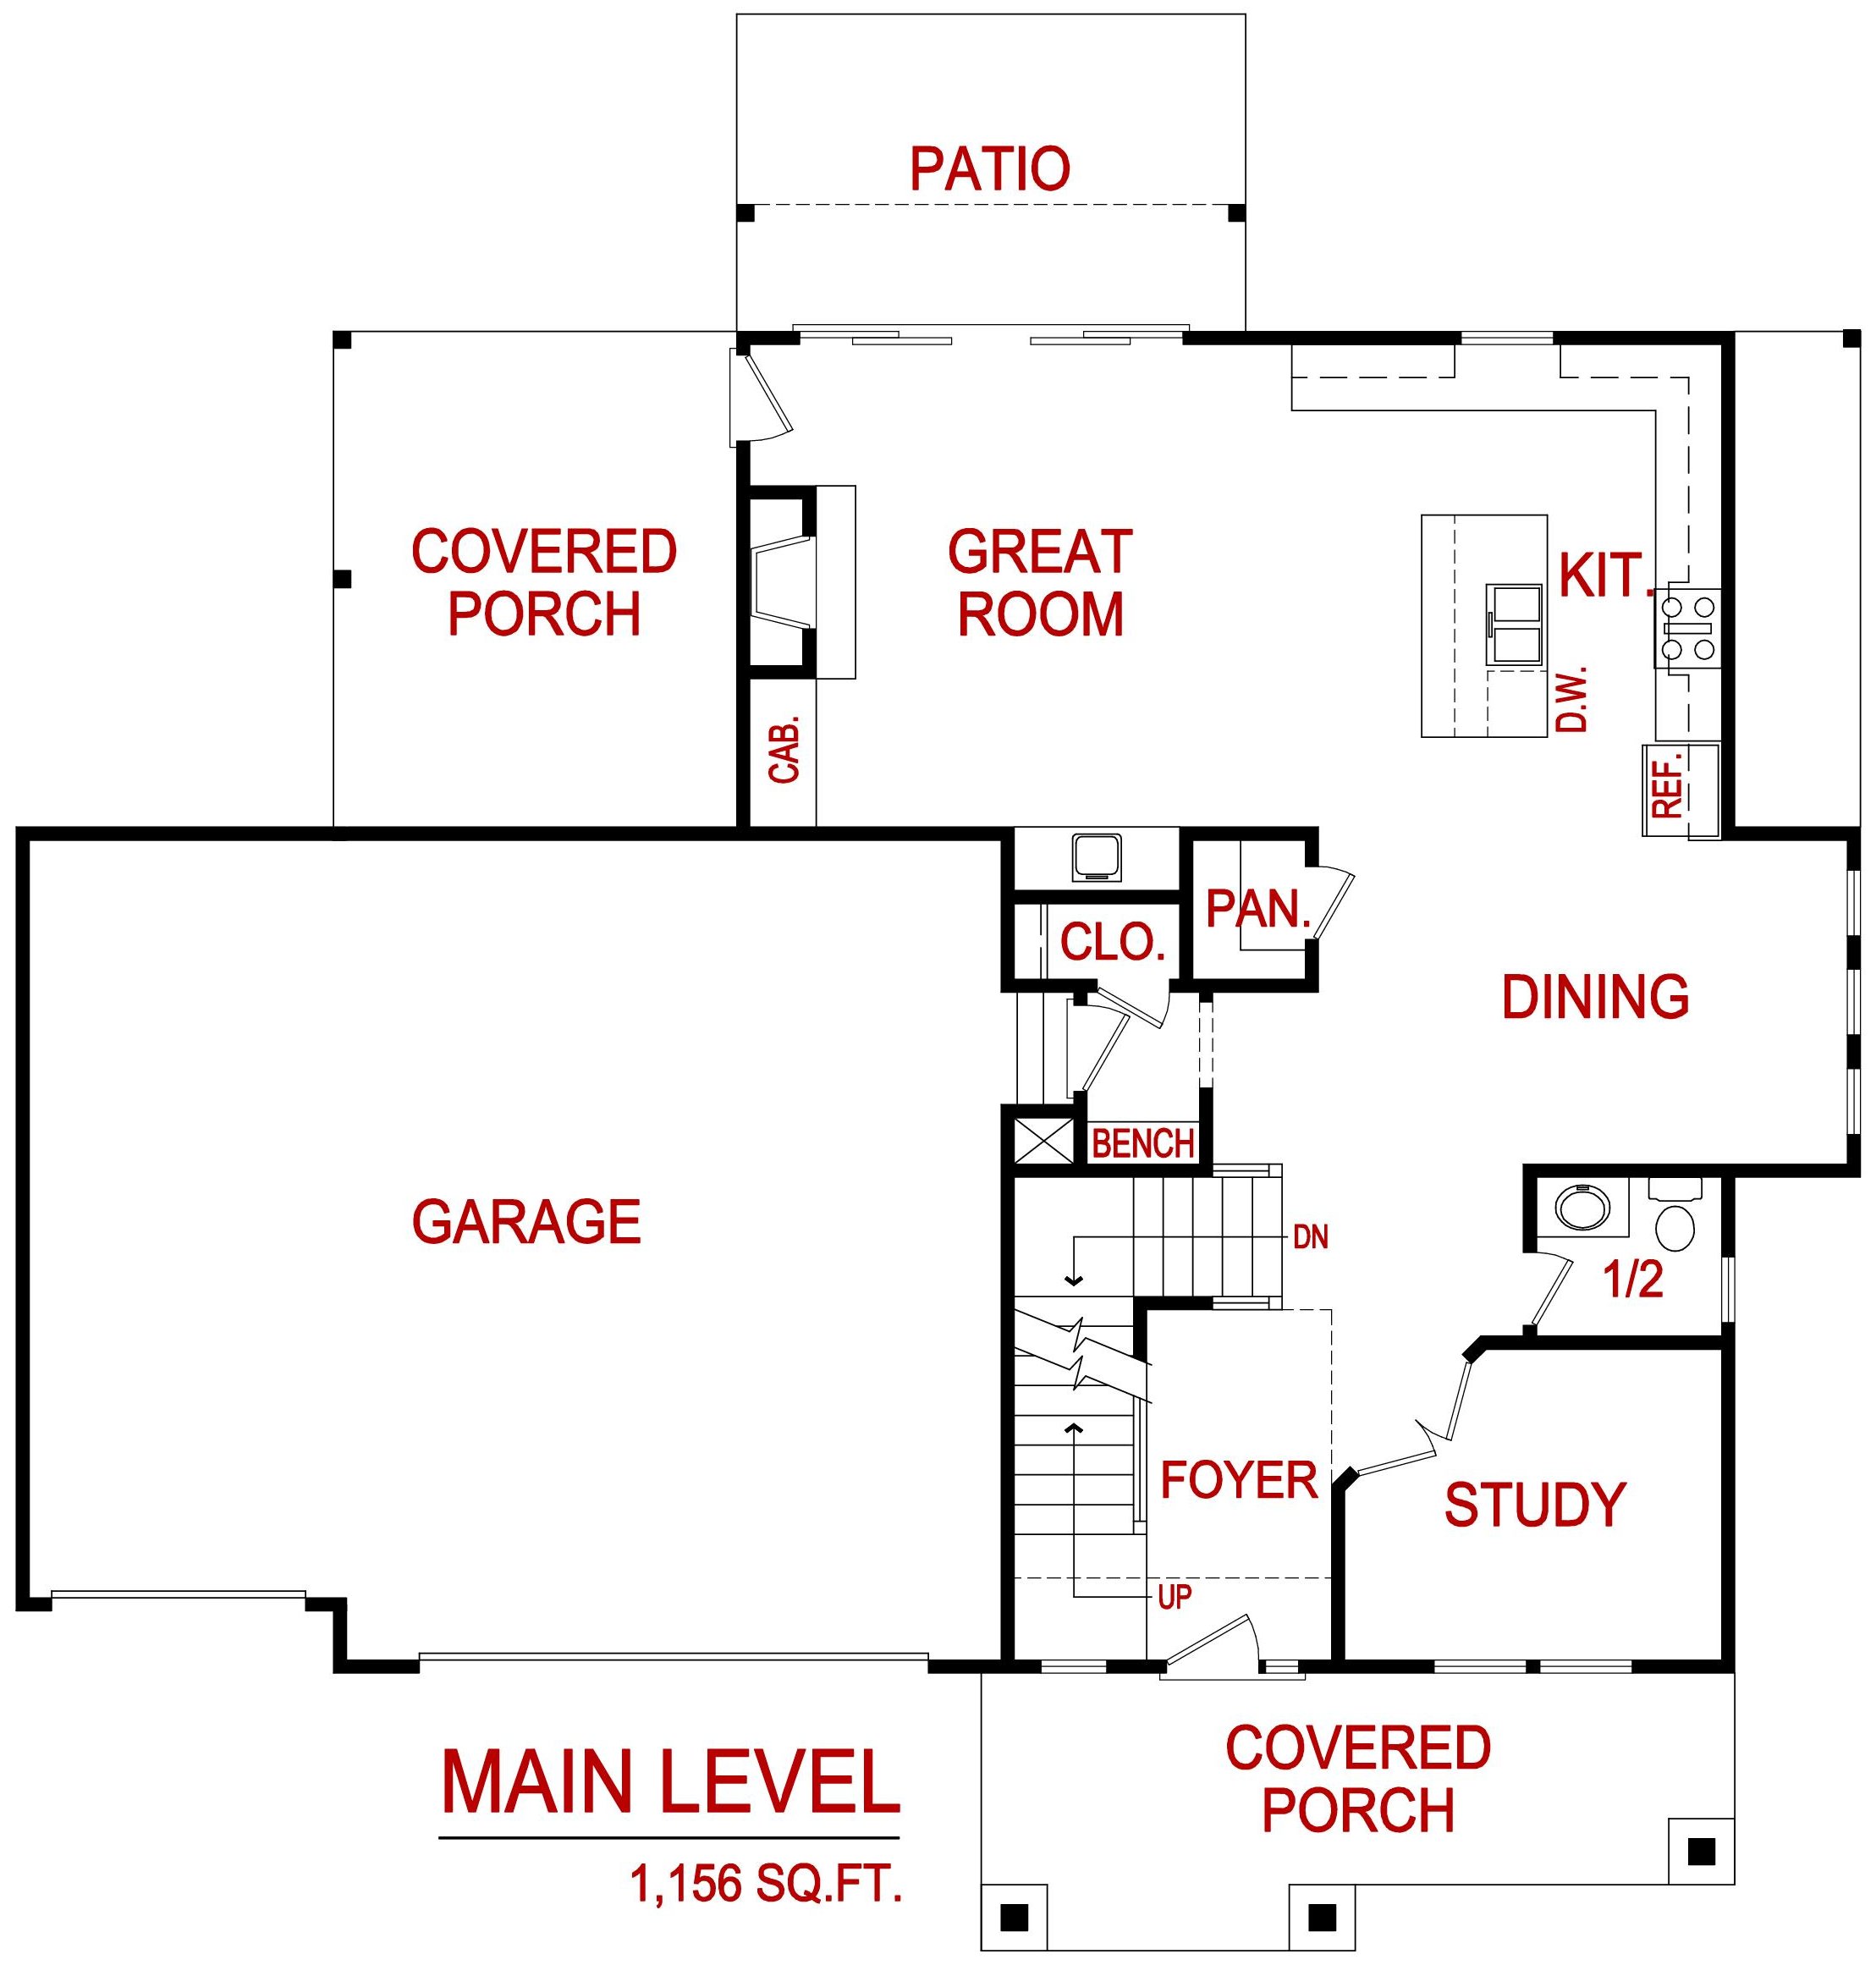 Main level floor plan for 6011 W. 85th Terr from Lambie Homes